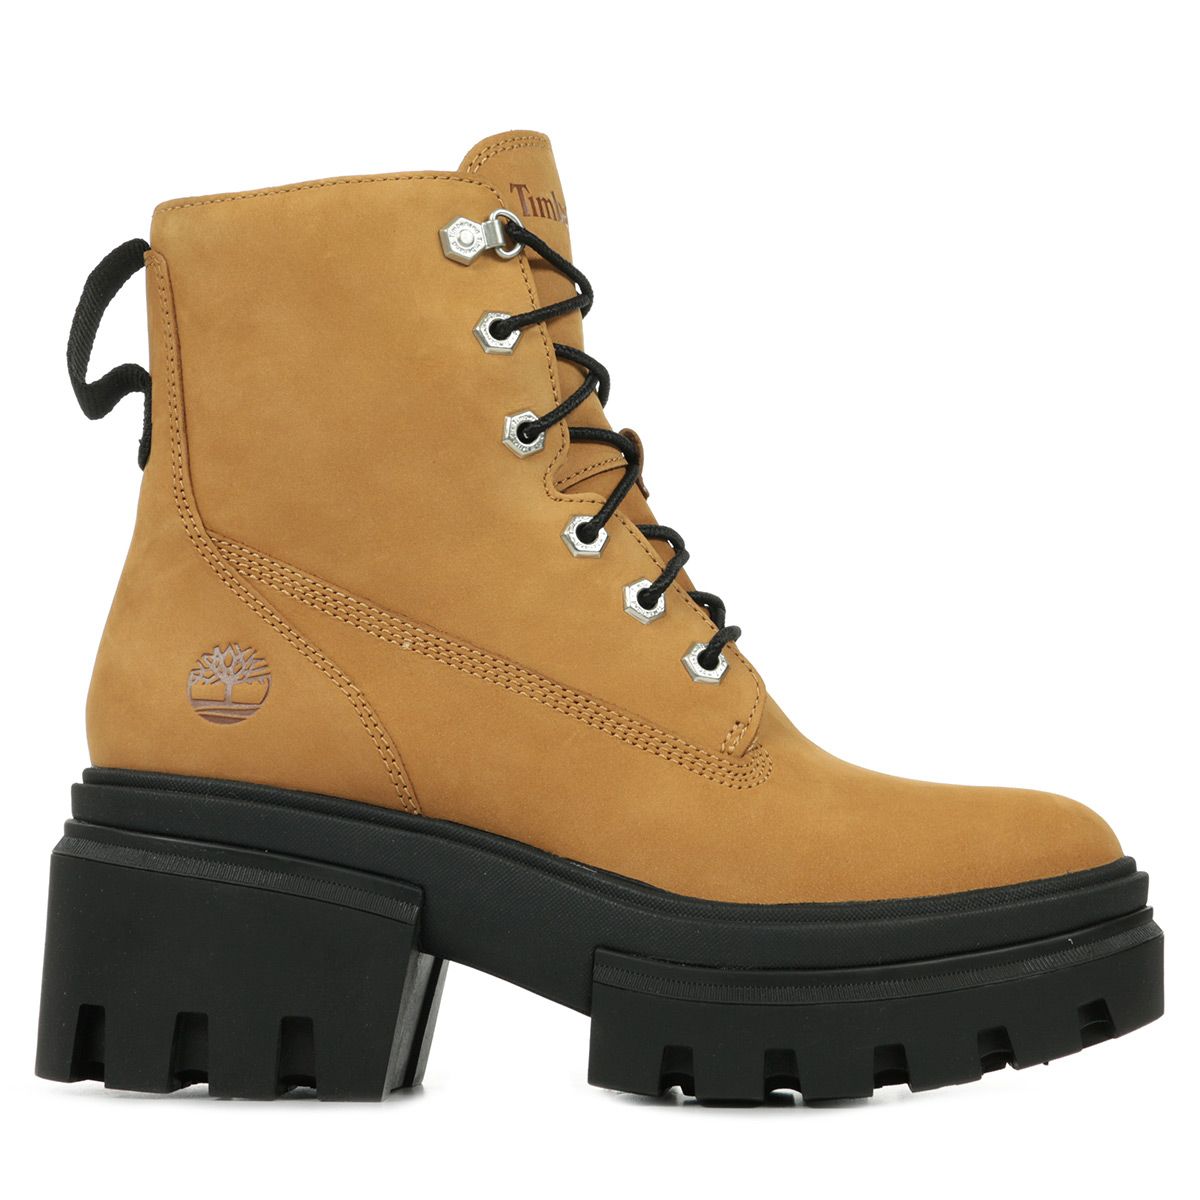 Comment nettoyer des chaussures Timberland (avec images)